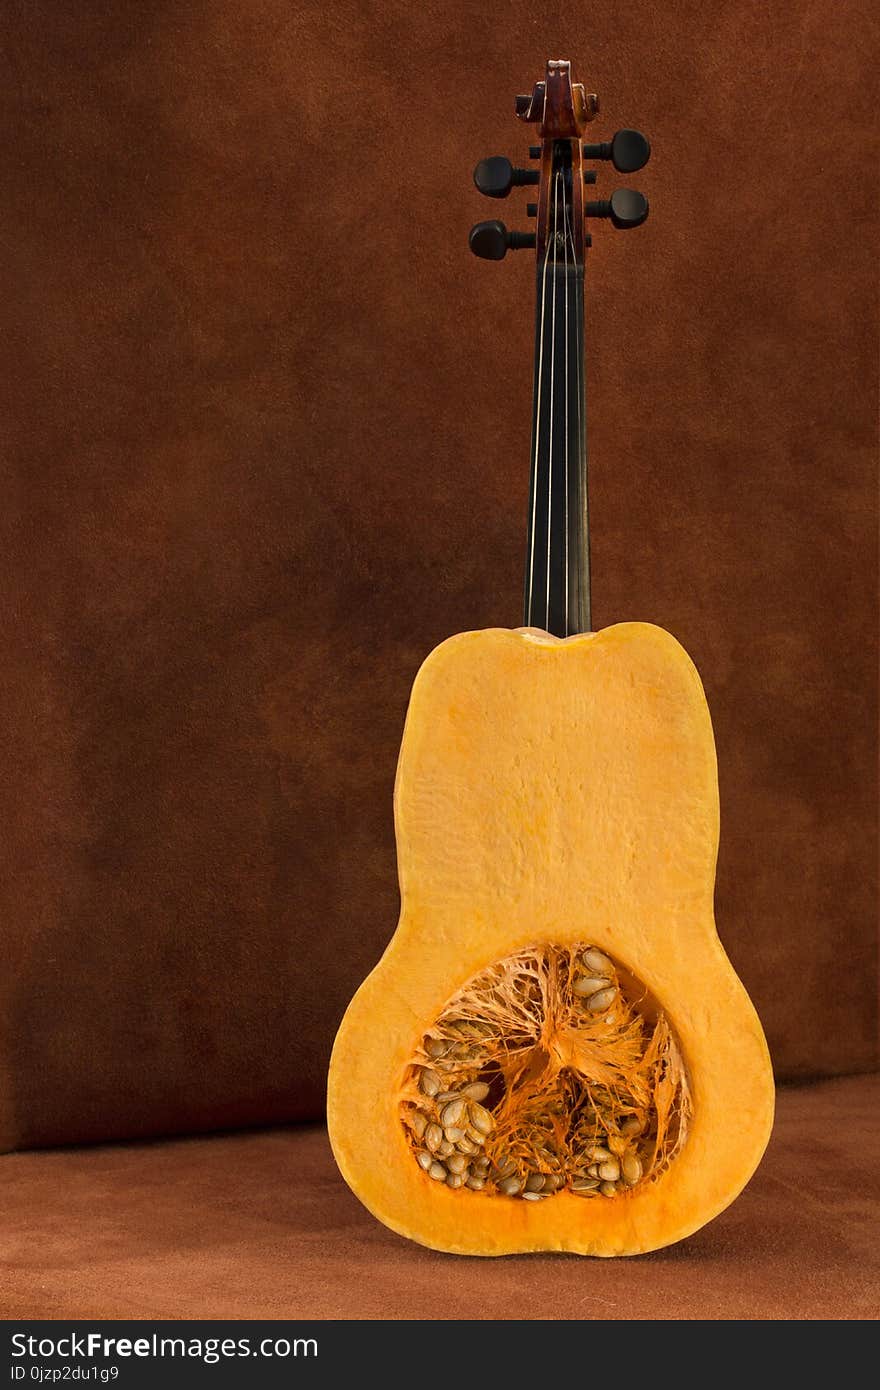 Still life with a cut pumpkin and fretboard on a brown background